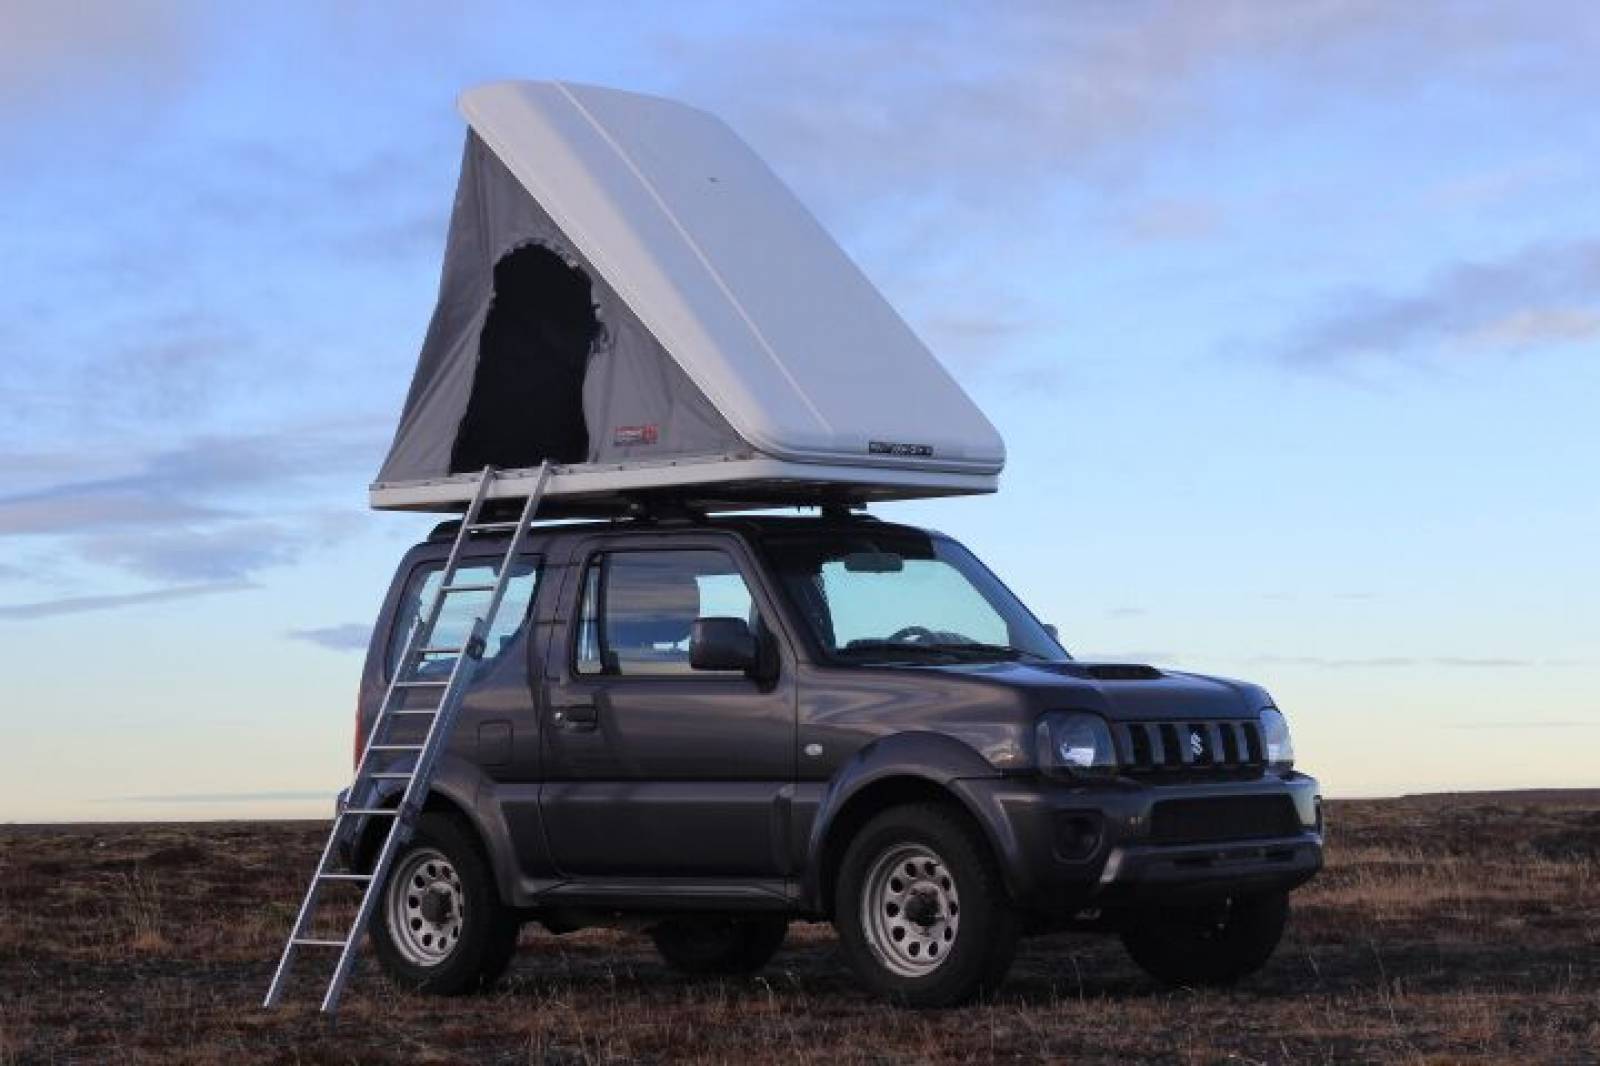 Suzuki Jimny Roof Tent open with ladder